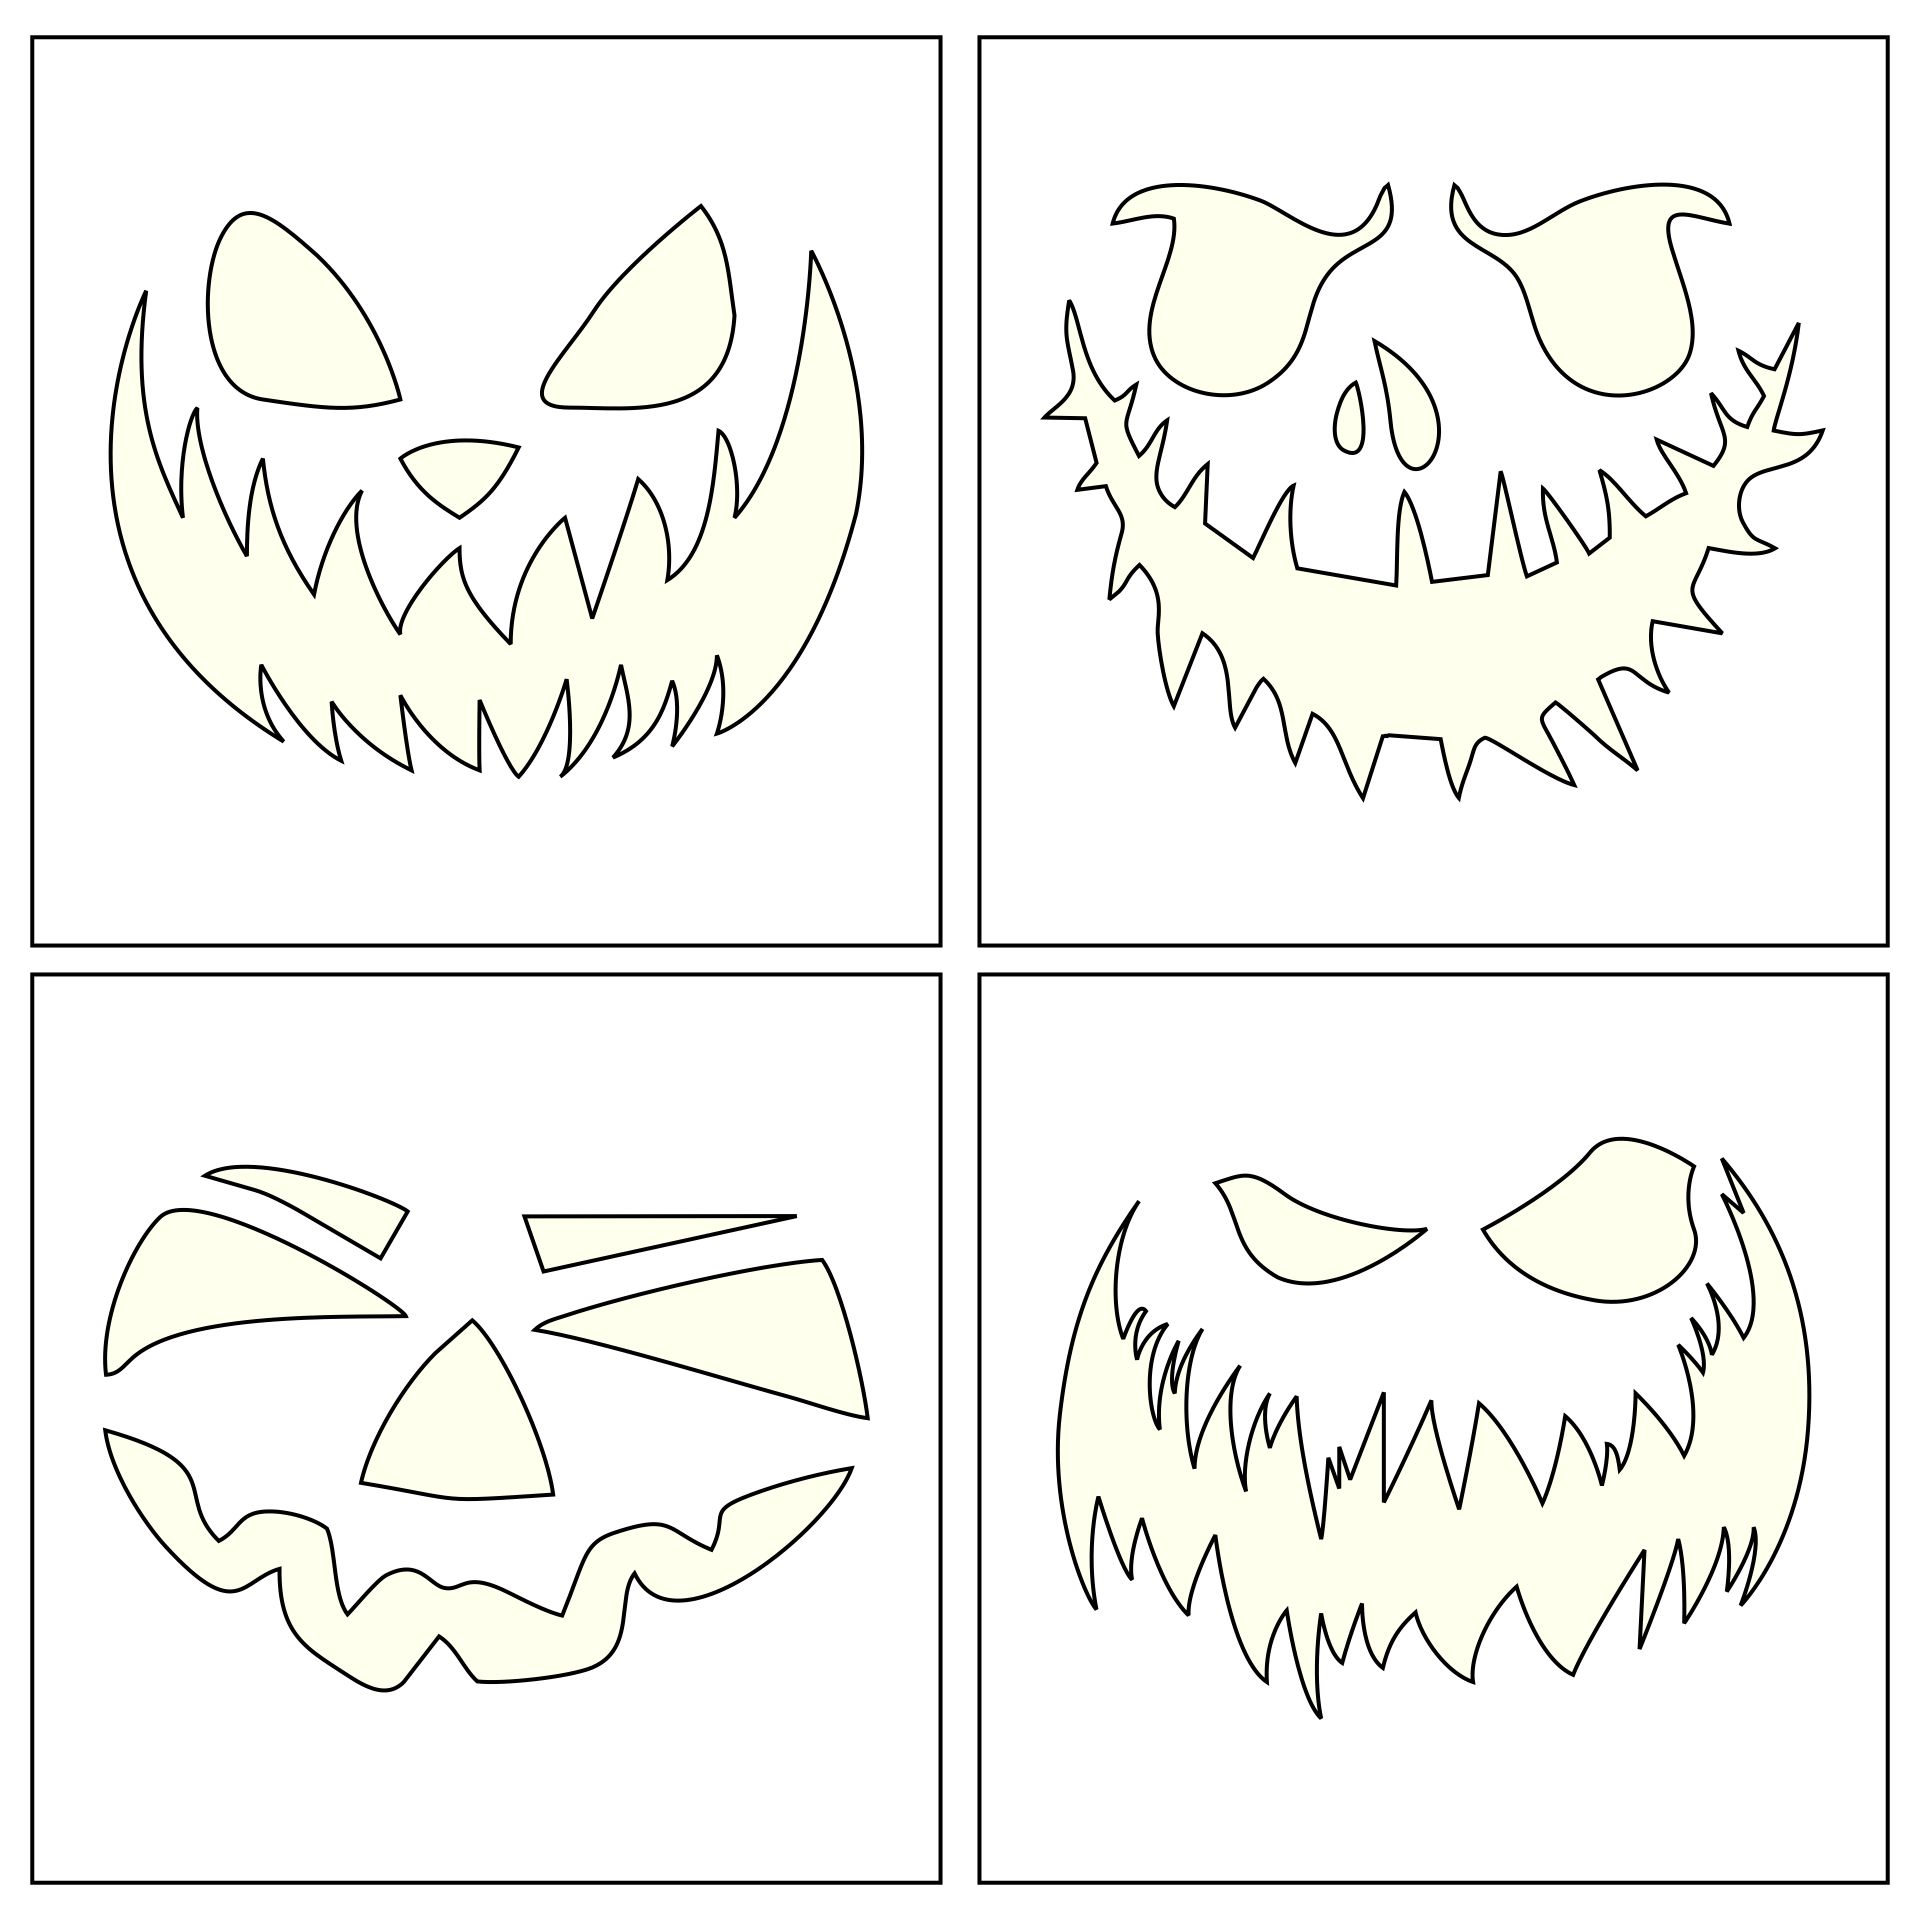 4 Best Images of Free Printable Halloween Stencils Cut Out - Halloween ...